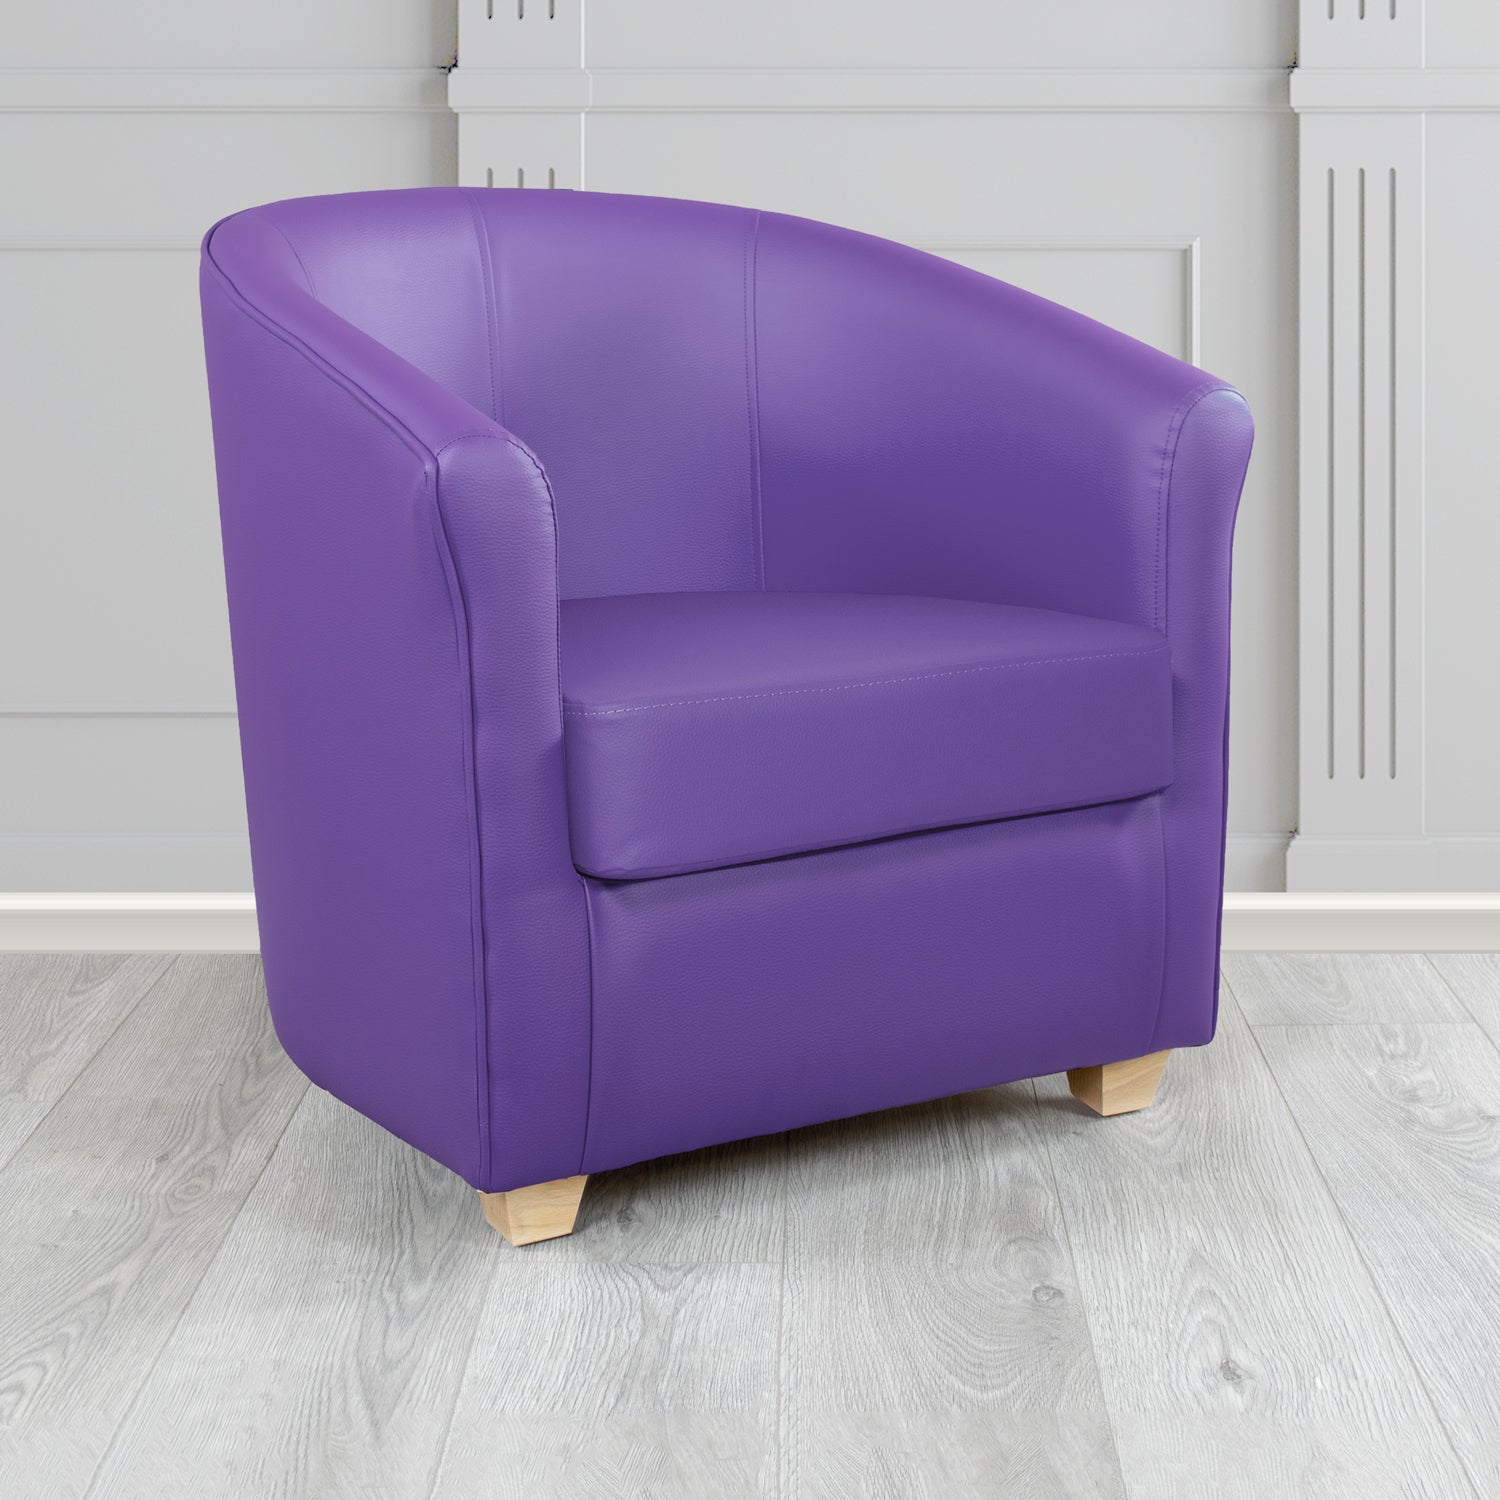 Cannes Just Colour Ultraviolet Crib 5 Faux Leather Tub Chair - The Tub Chair Shop